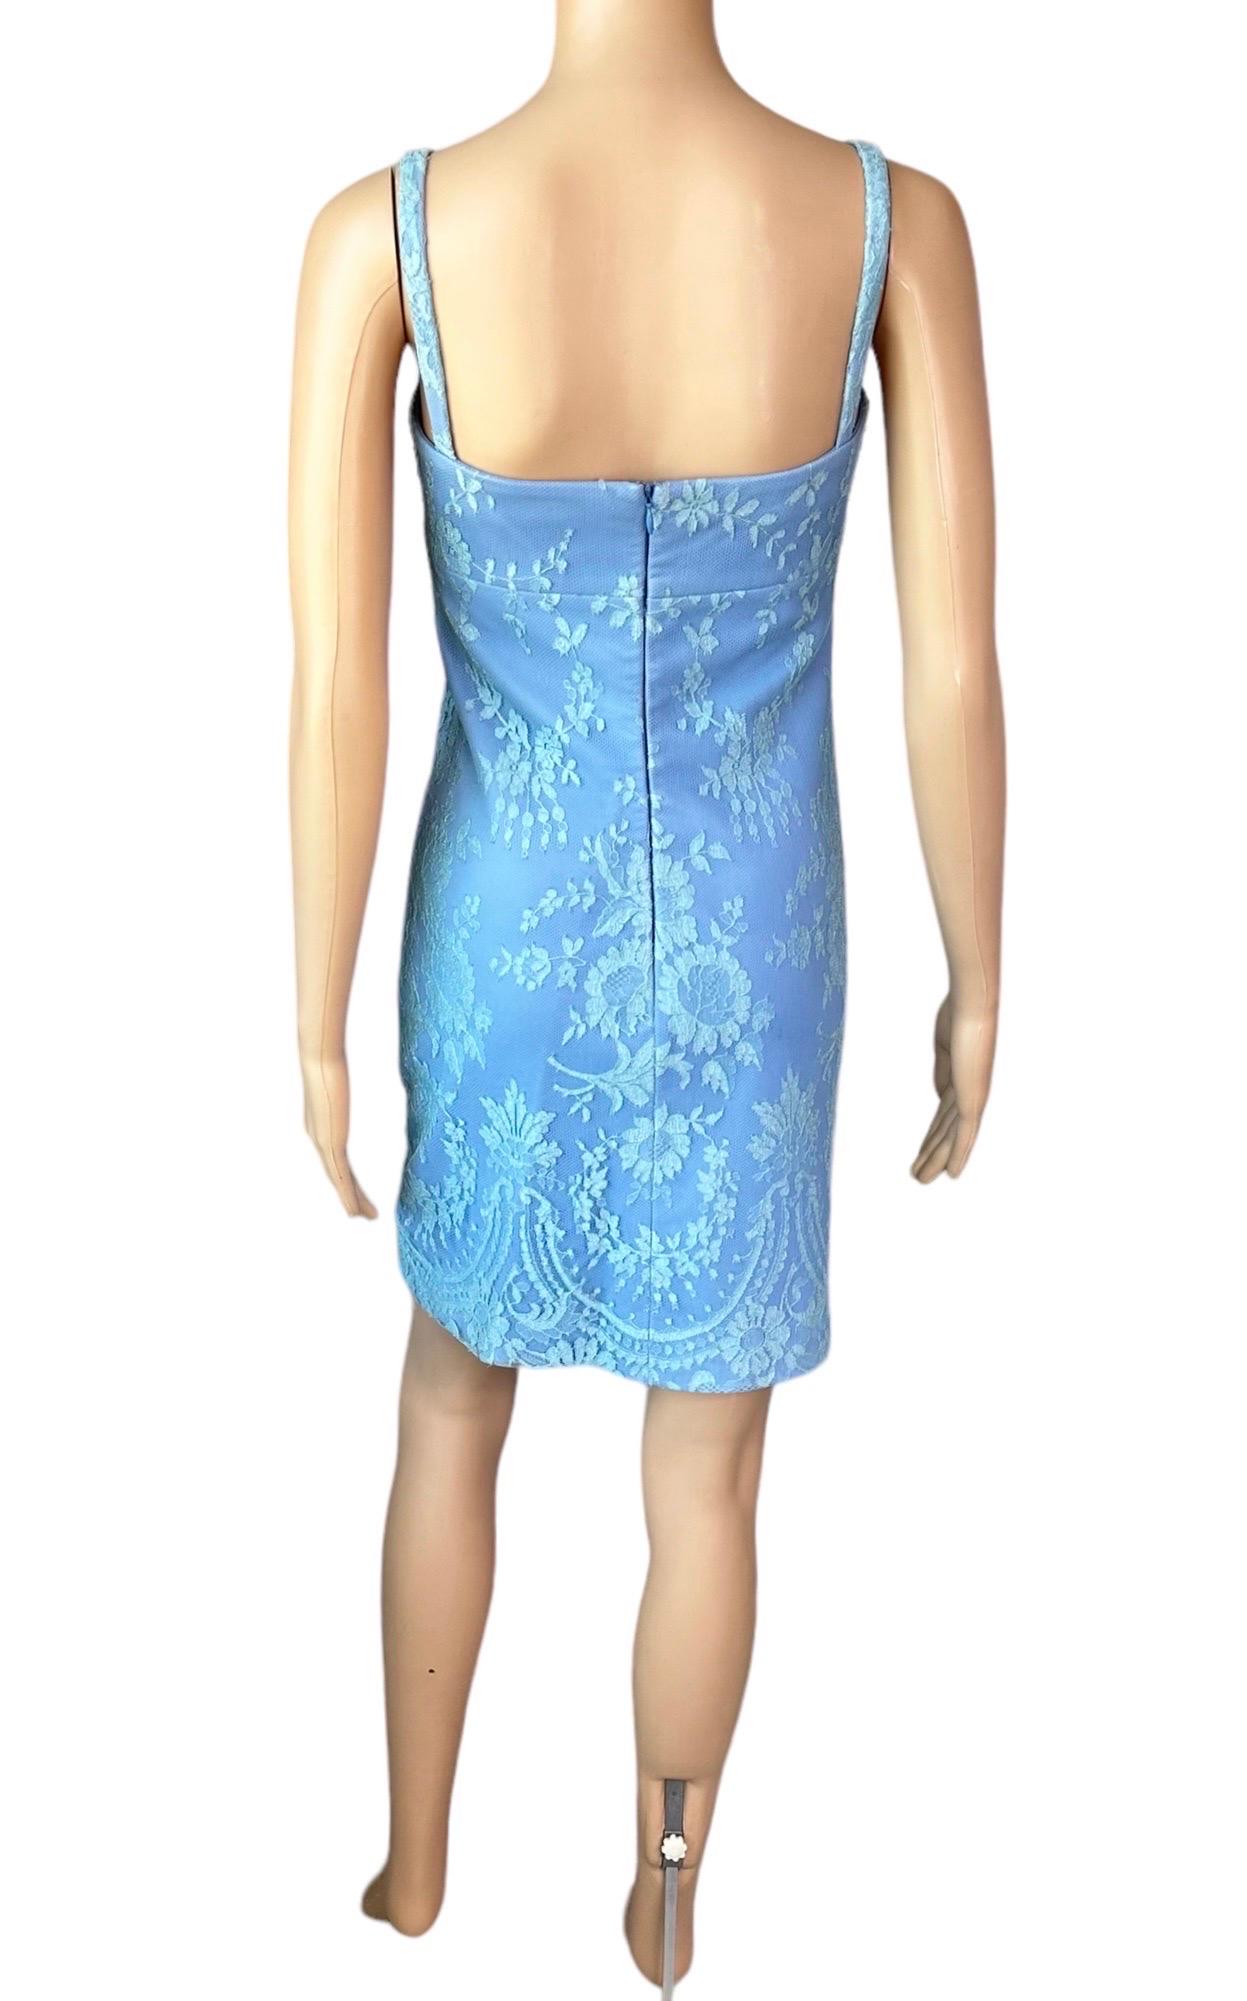 Gianni Versace F/W 1996 Vintage Floral Lace and Leather Blue Mini Dress  For Sale 4